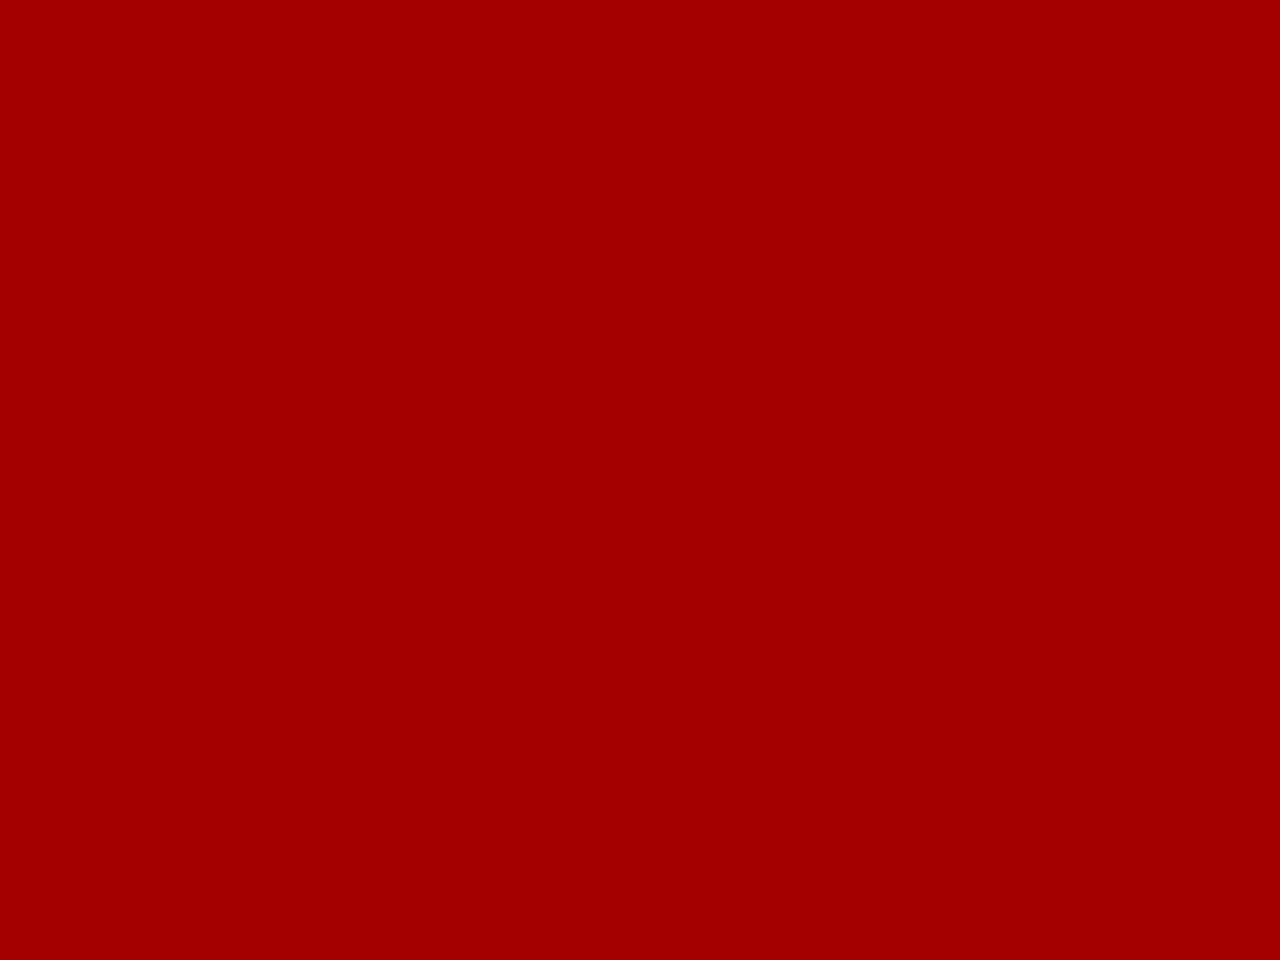 1280x960 Dark Candy Apple Red Solid Color Background